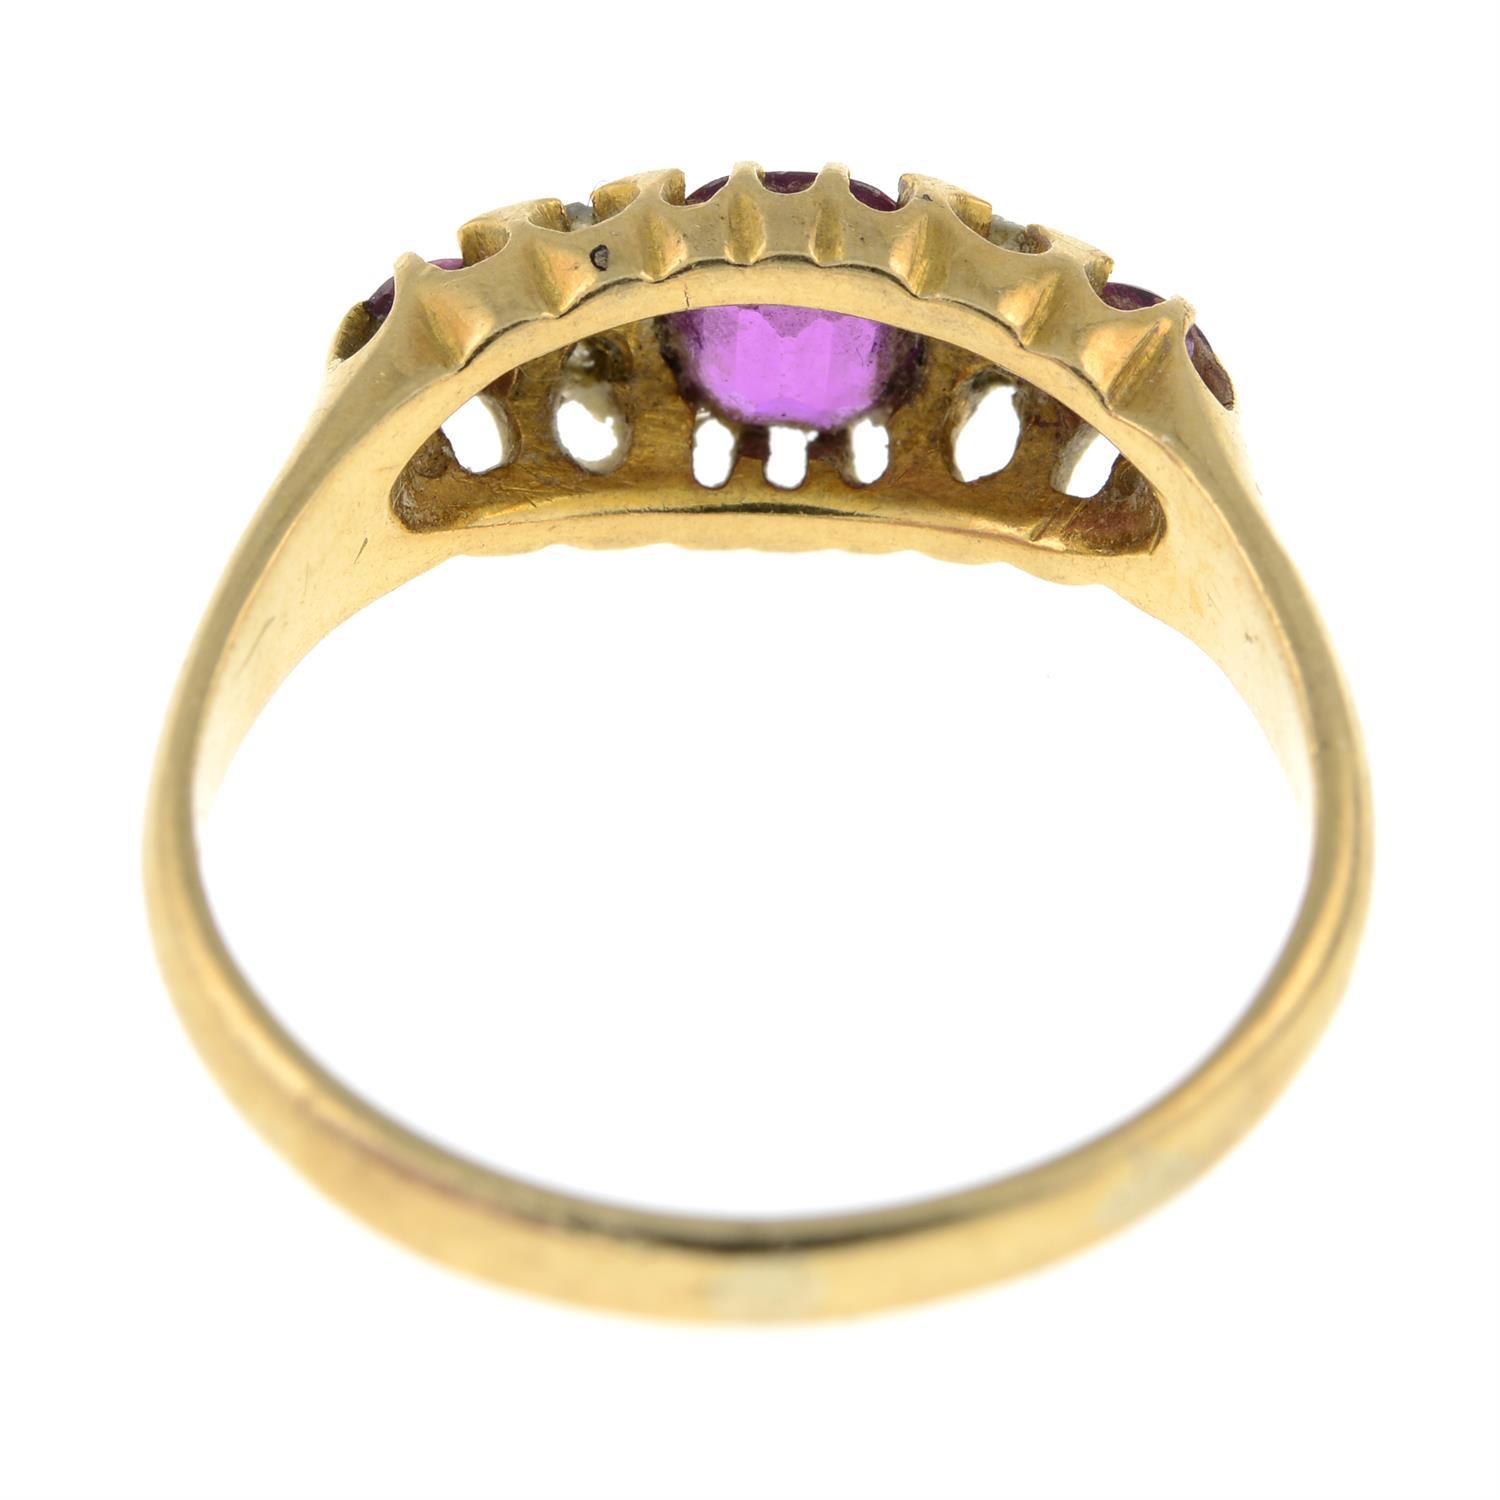 An early 20th century 18ct gold ruby and rose-cut diamond dress ring. - Image 2 of 2